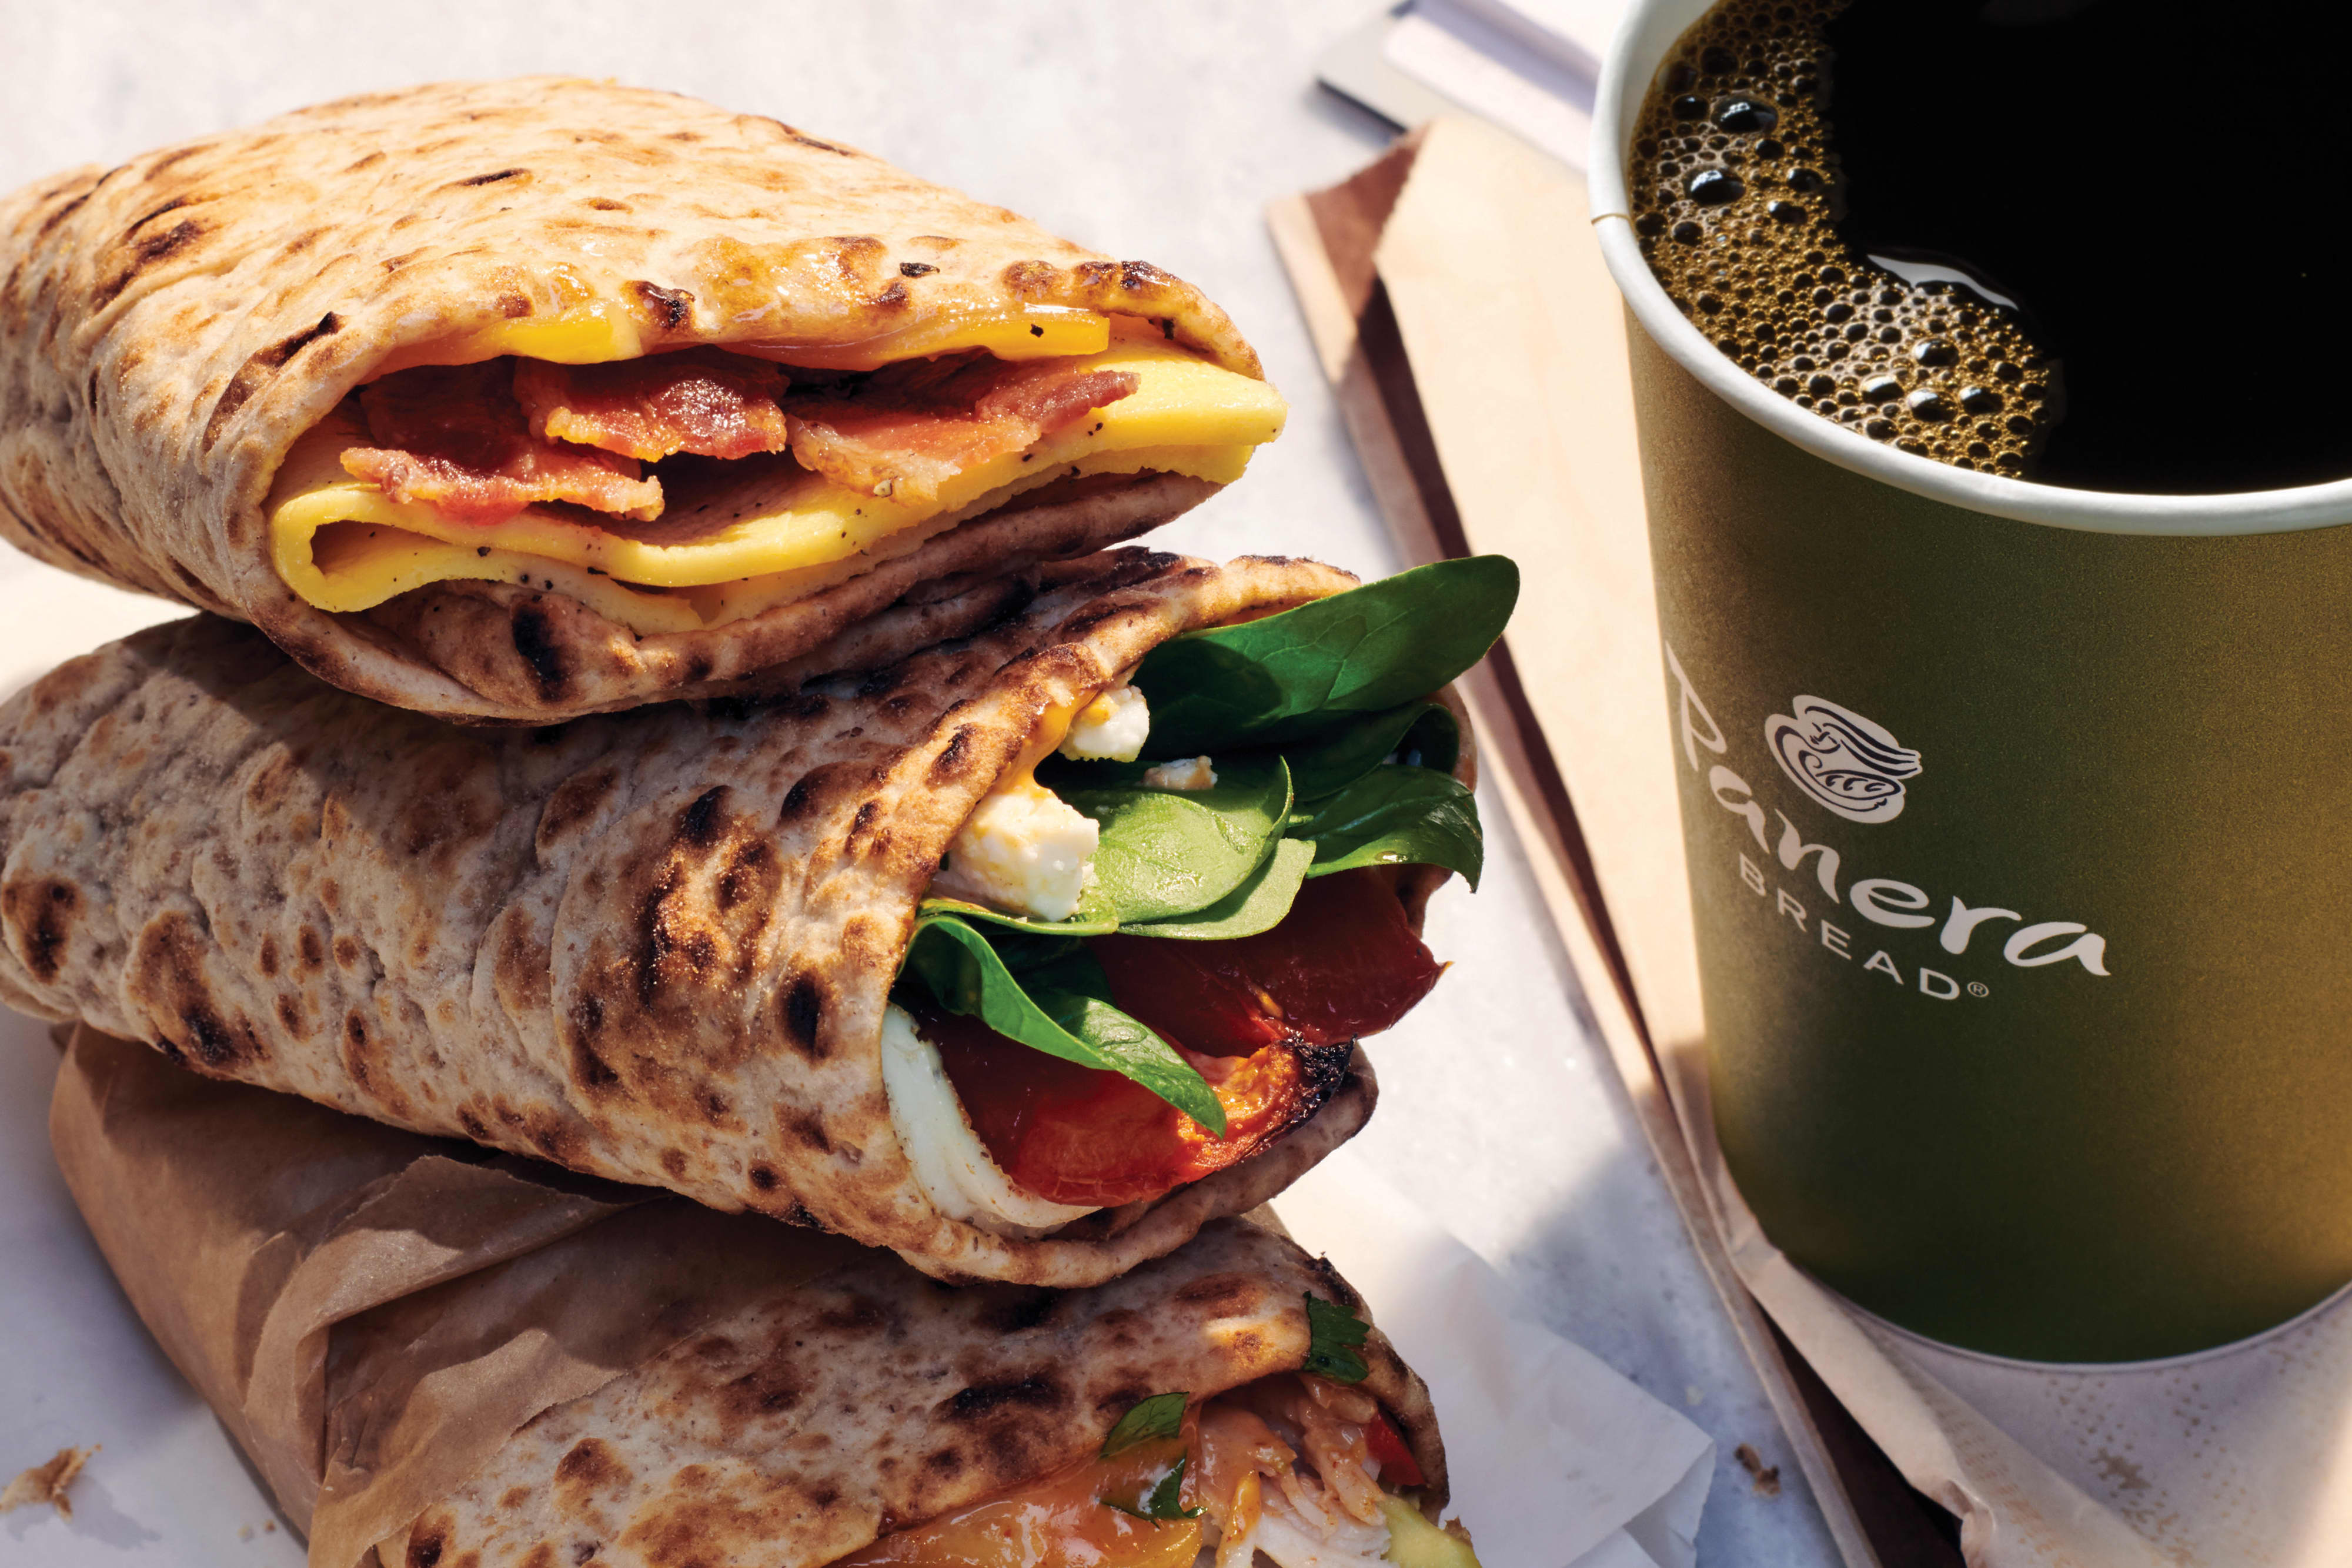 What Time Does Breakfast End at Panera? Find Out Now!